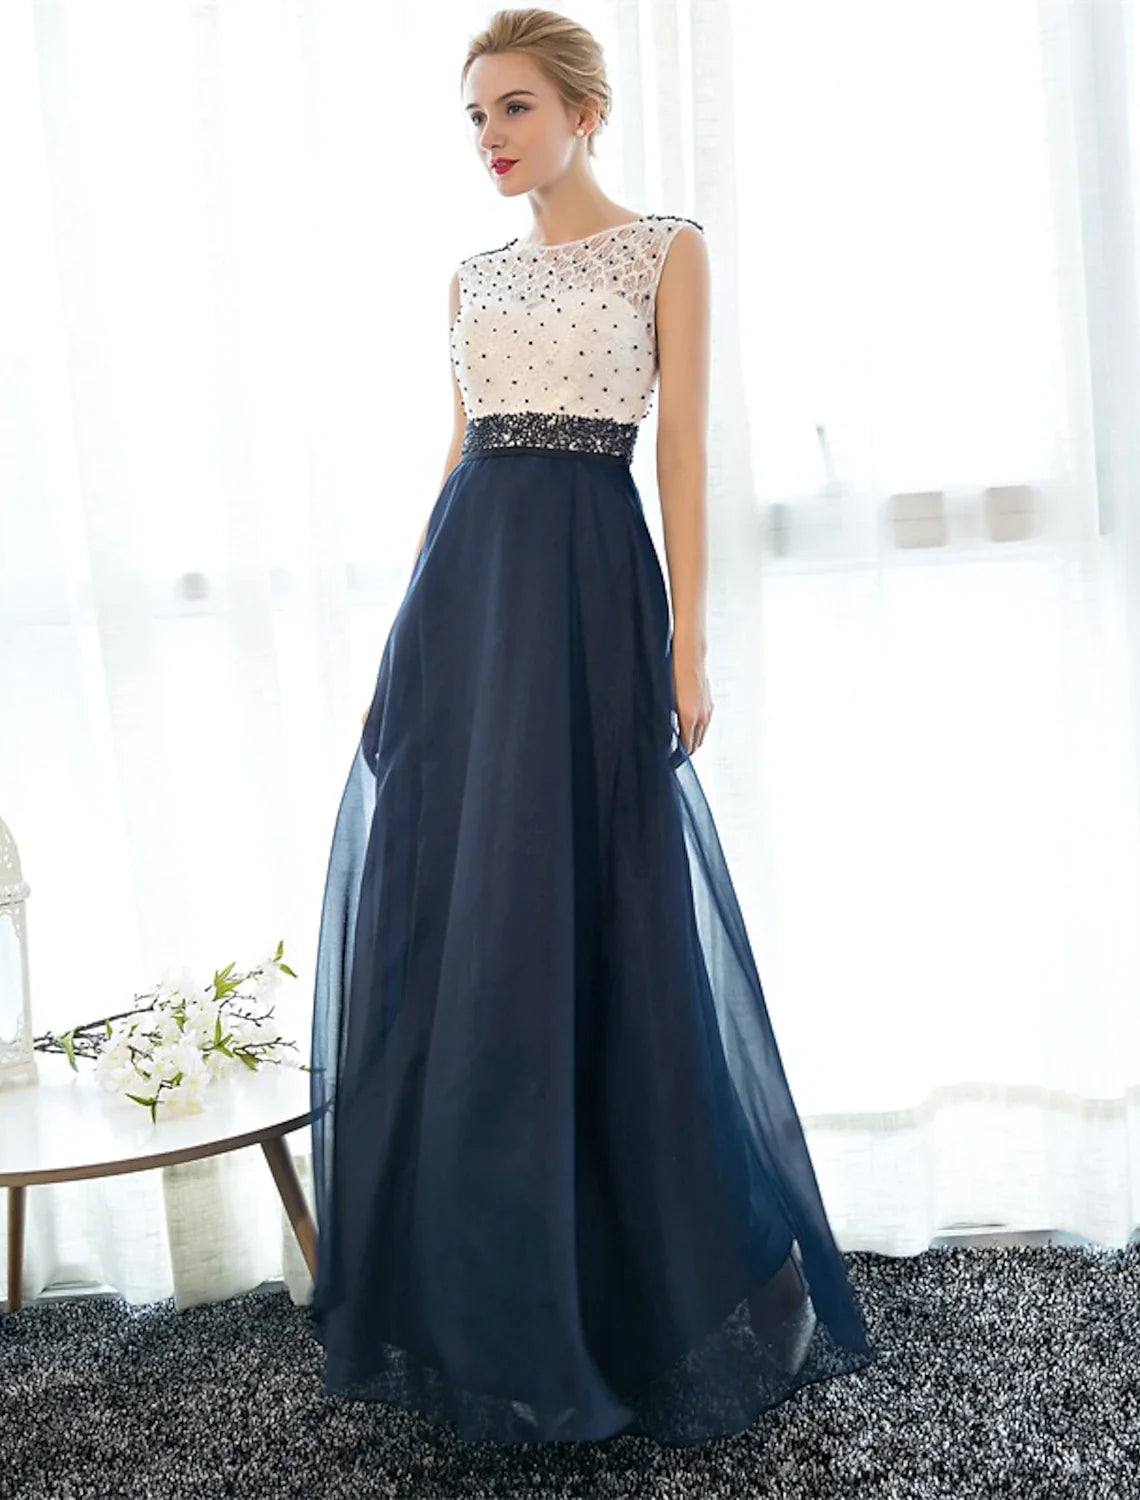 A-Line Beautiful Back Elegant Beaded & Sequin Prom Formal Evening Dress Illusion Neck Sleeveless Floor Length Tulle Over Lace with Beading